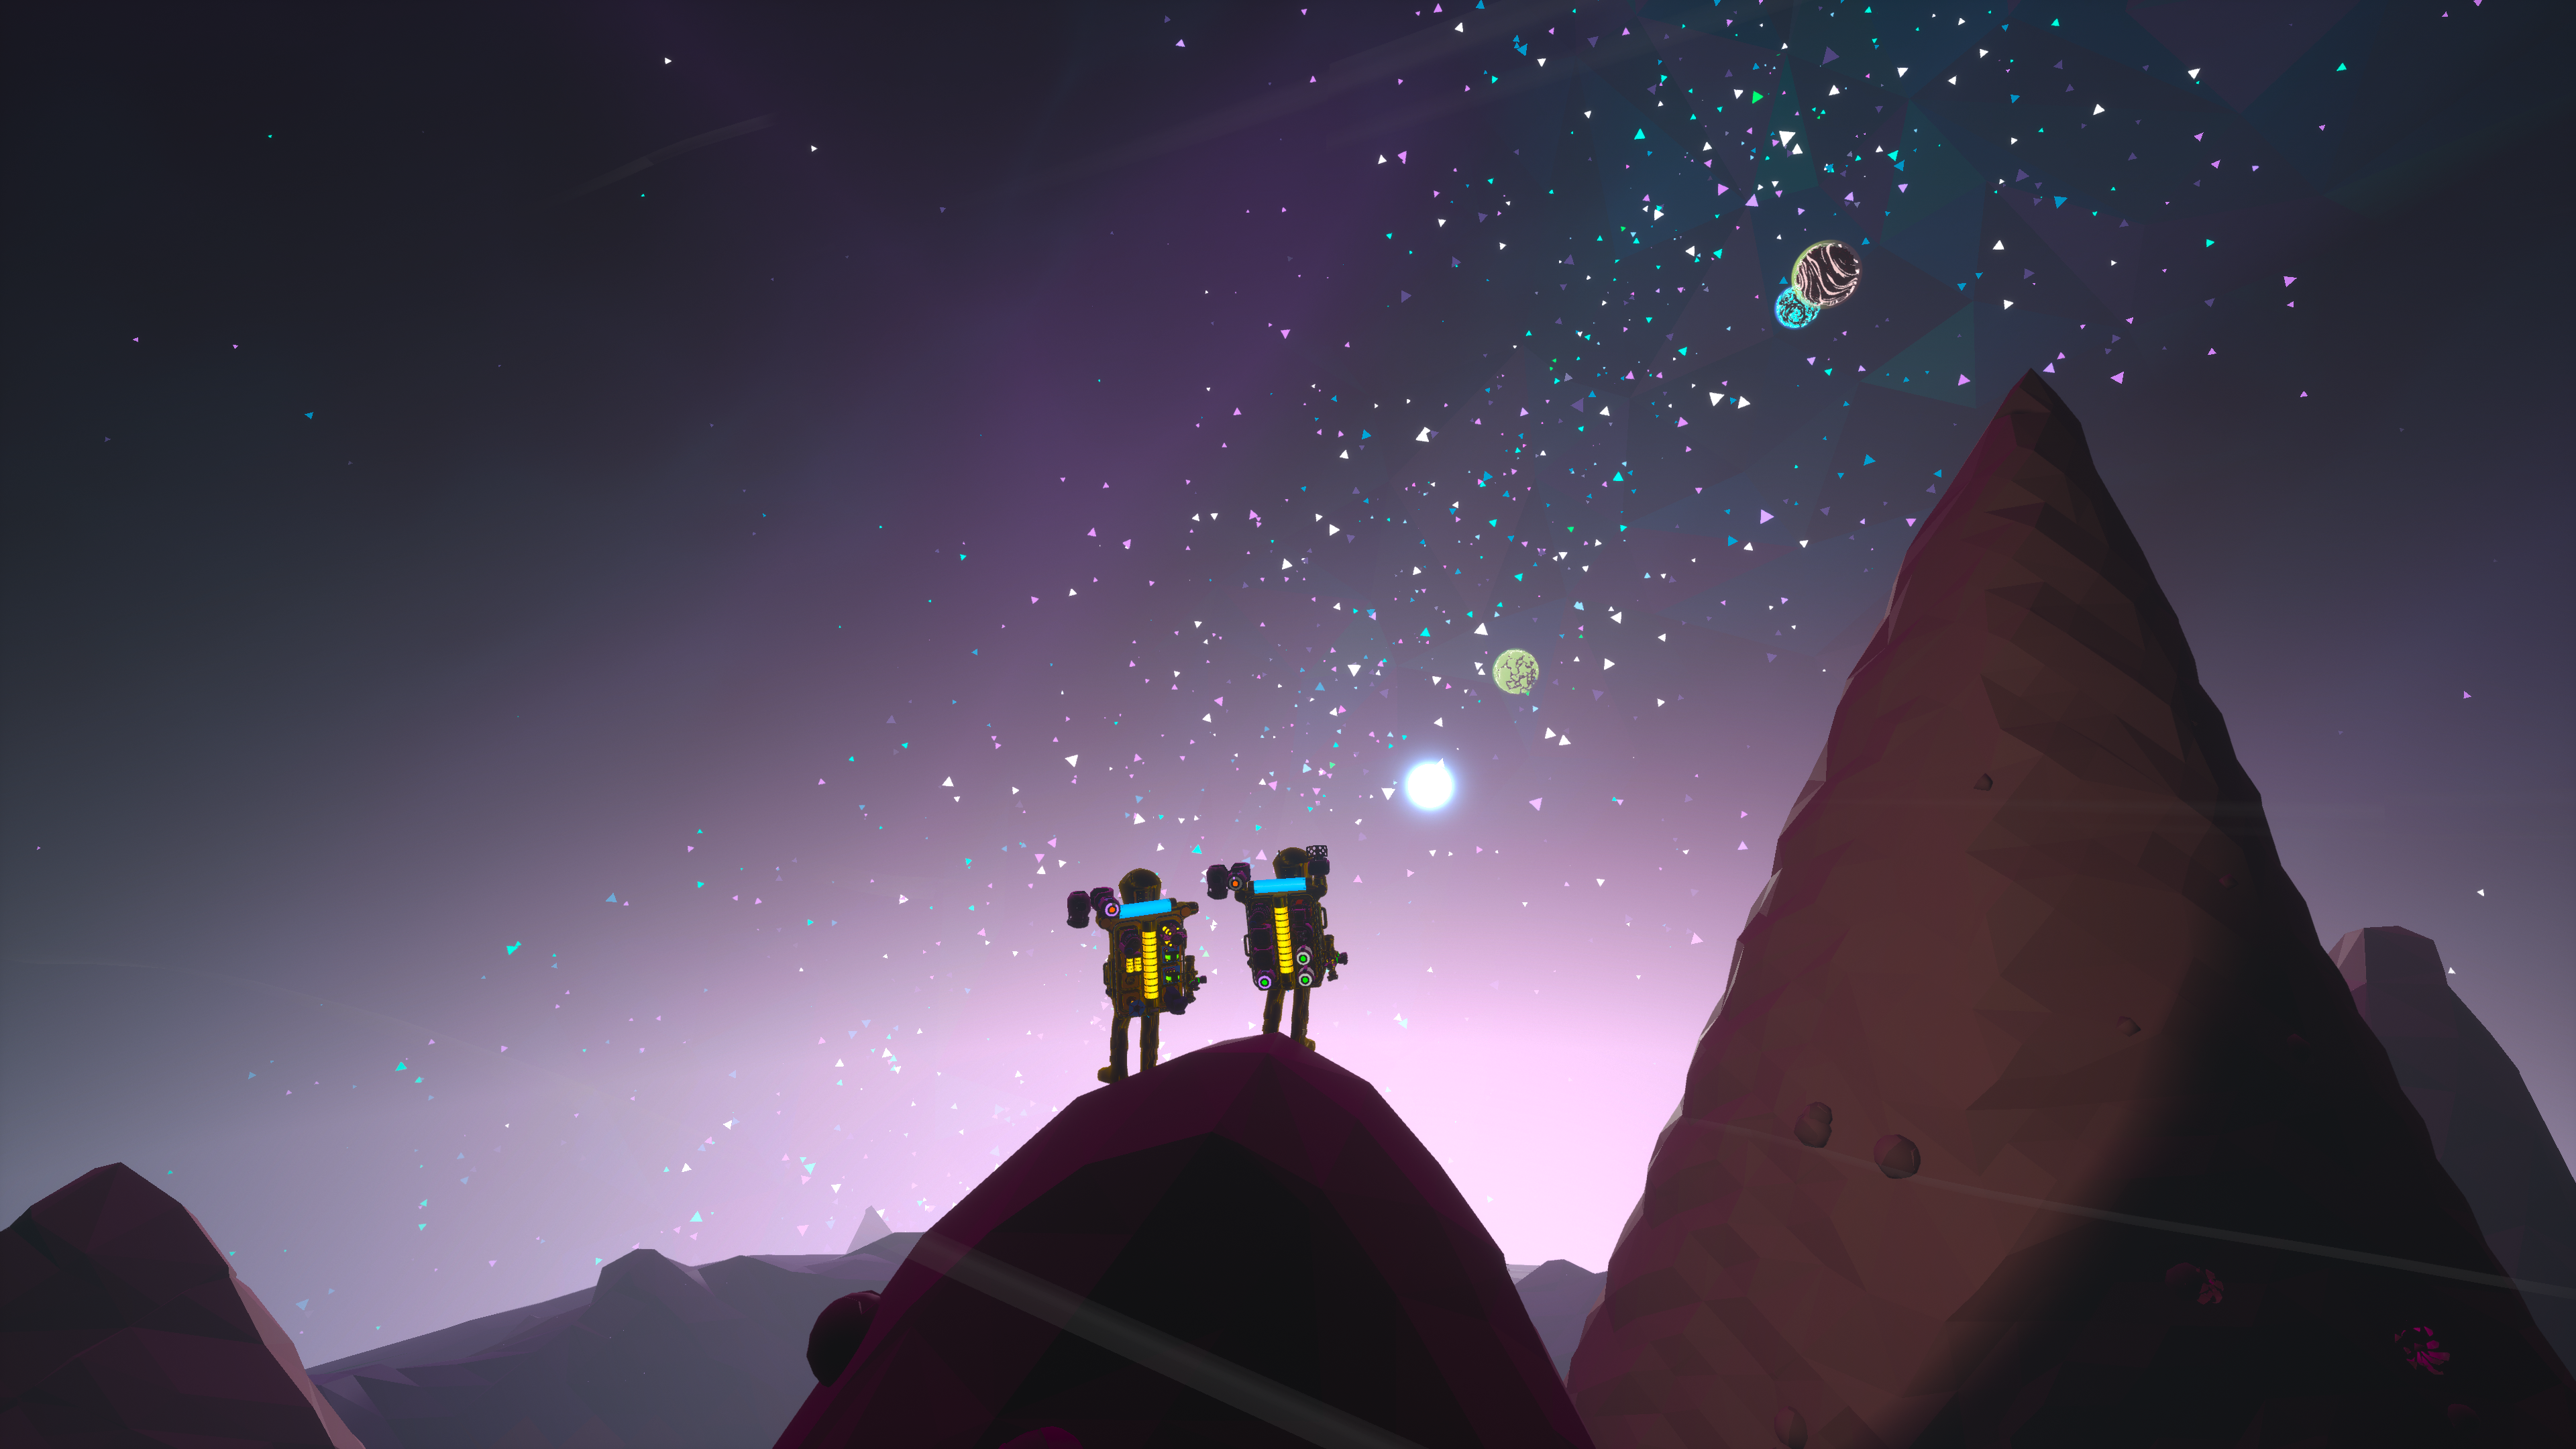 Astroneer Indie Games Space Universe Video Games Stars Video Game Art Starry Night Mountains 3840x2160